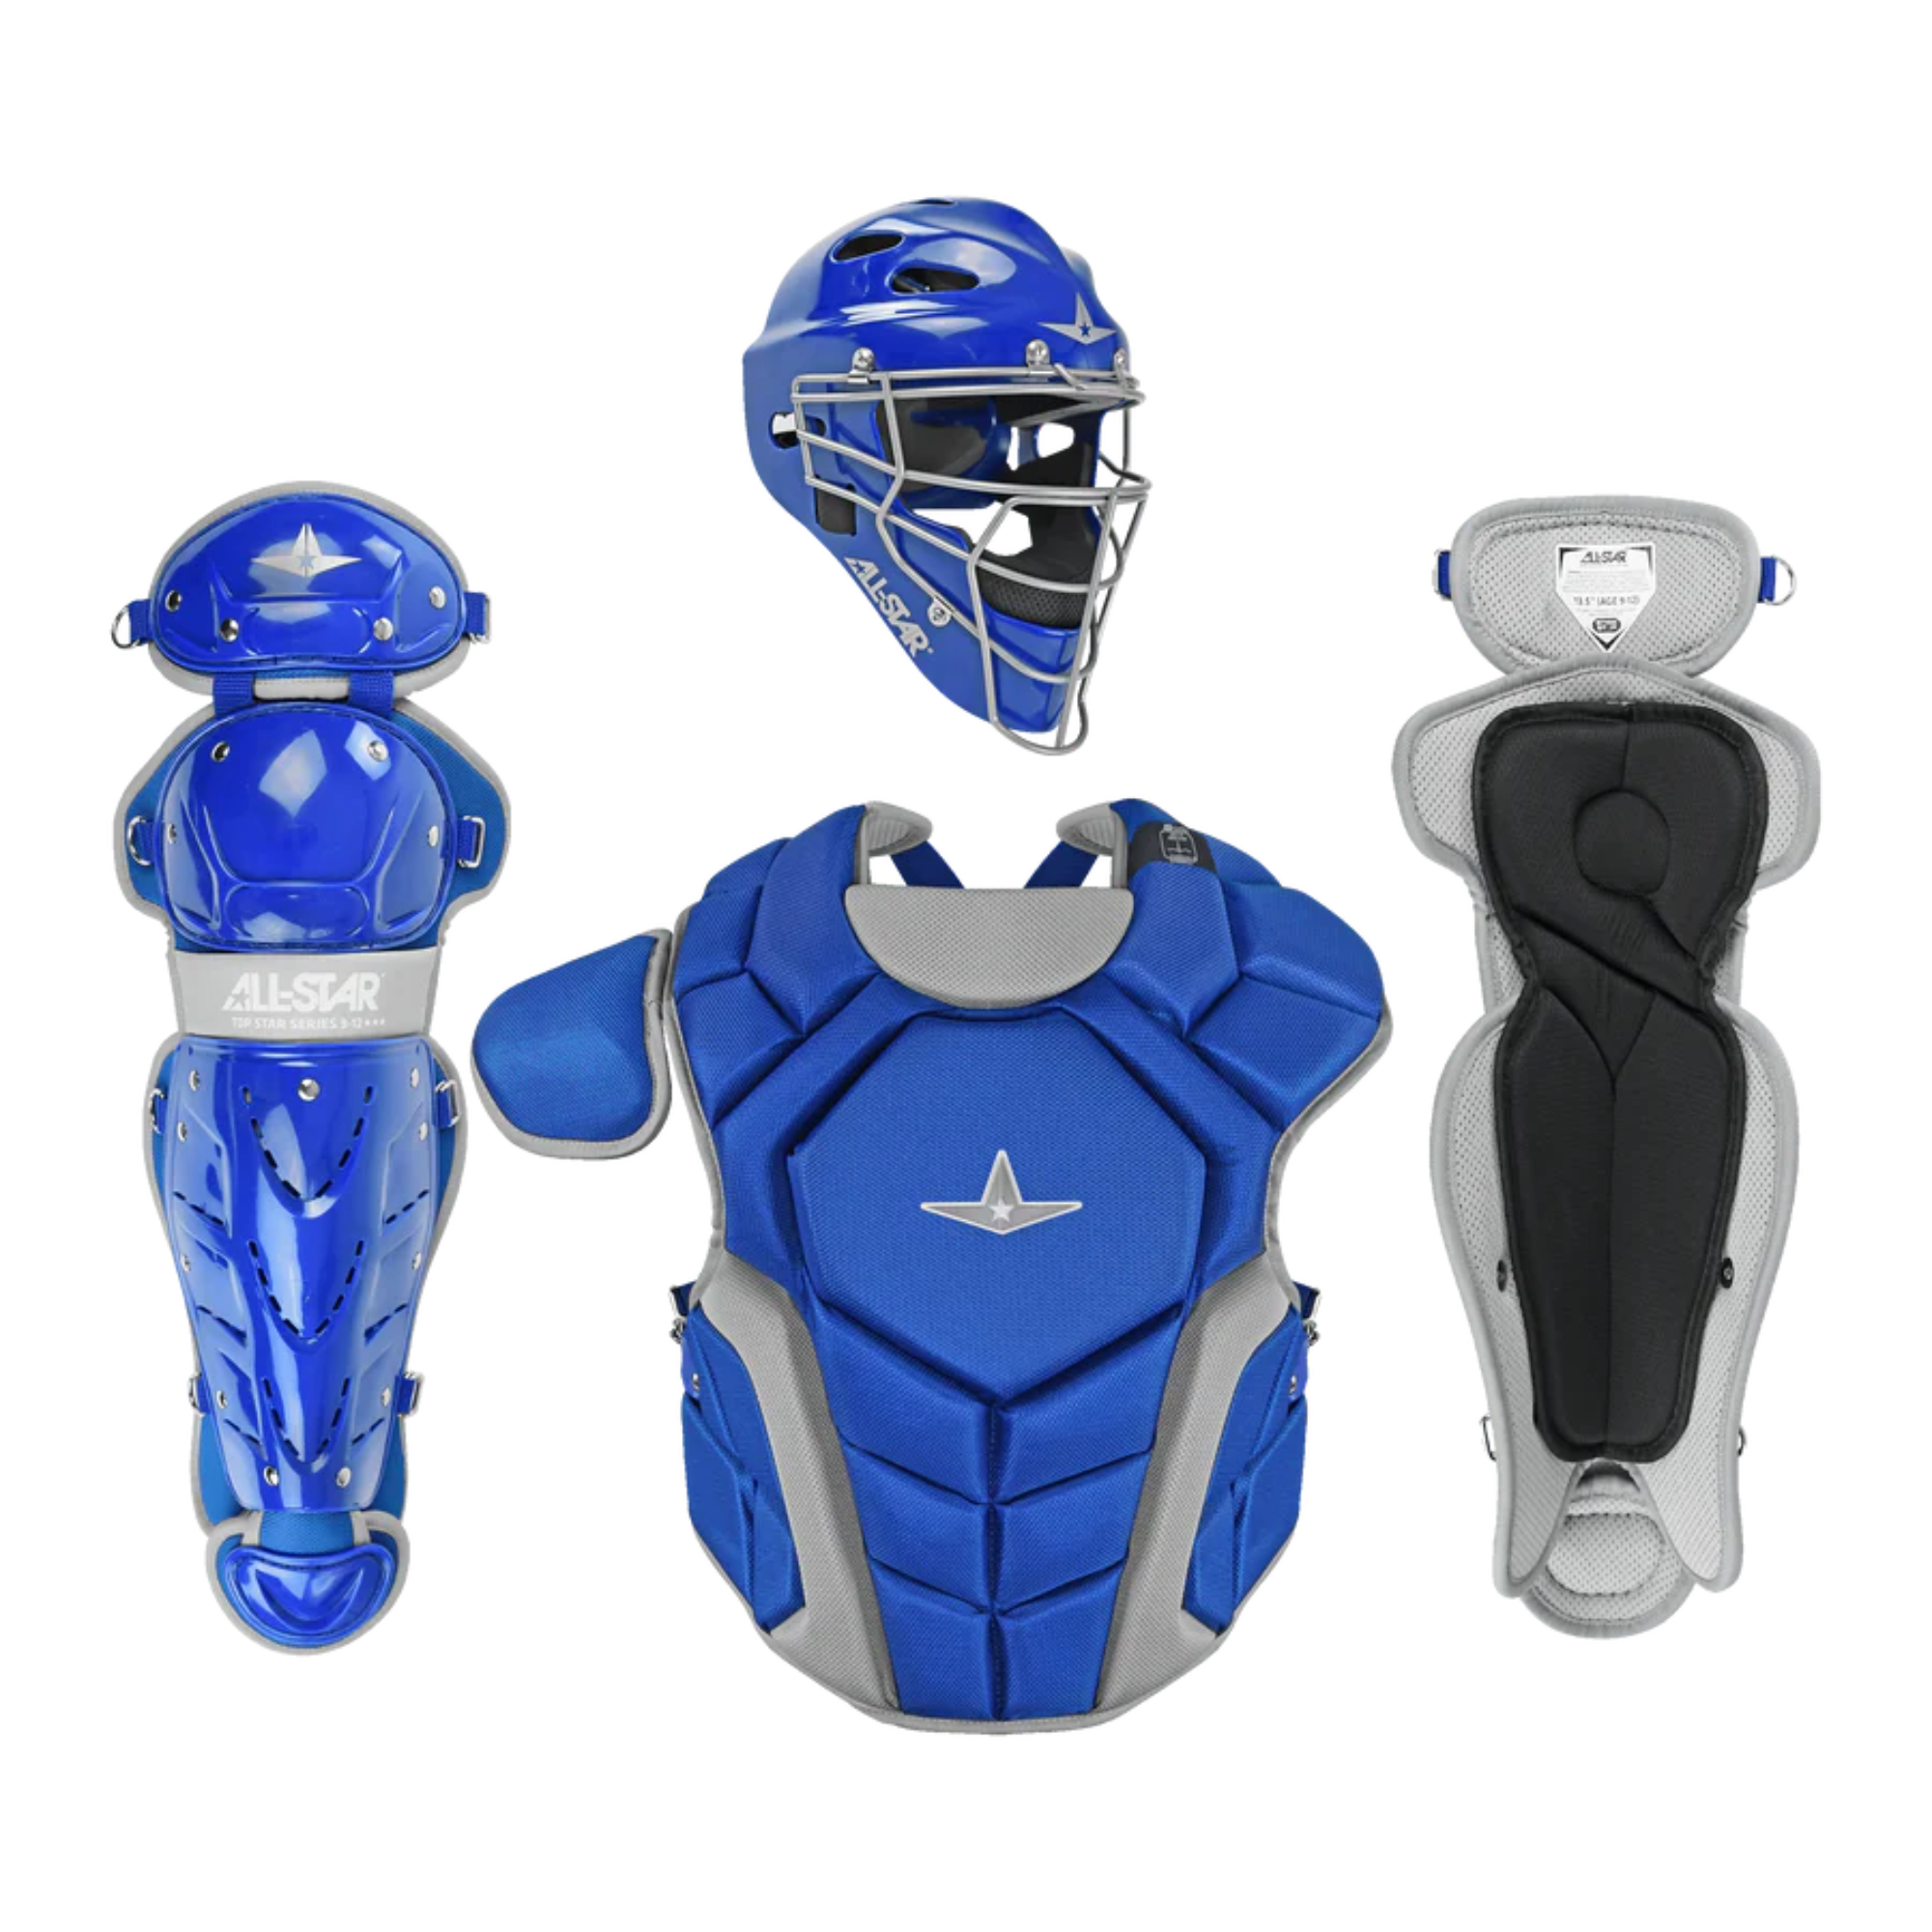 All-Star Top Star Catcher's Kit / Meets NOCSAE Age 7-9